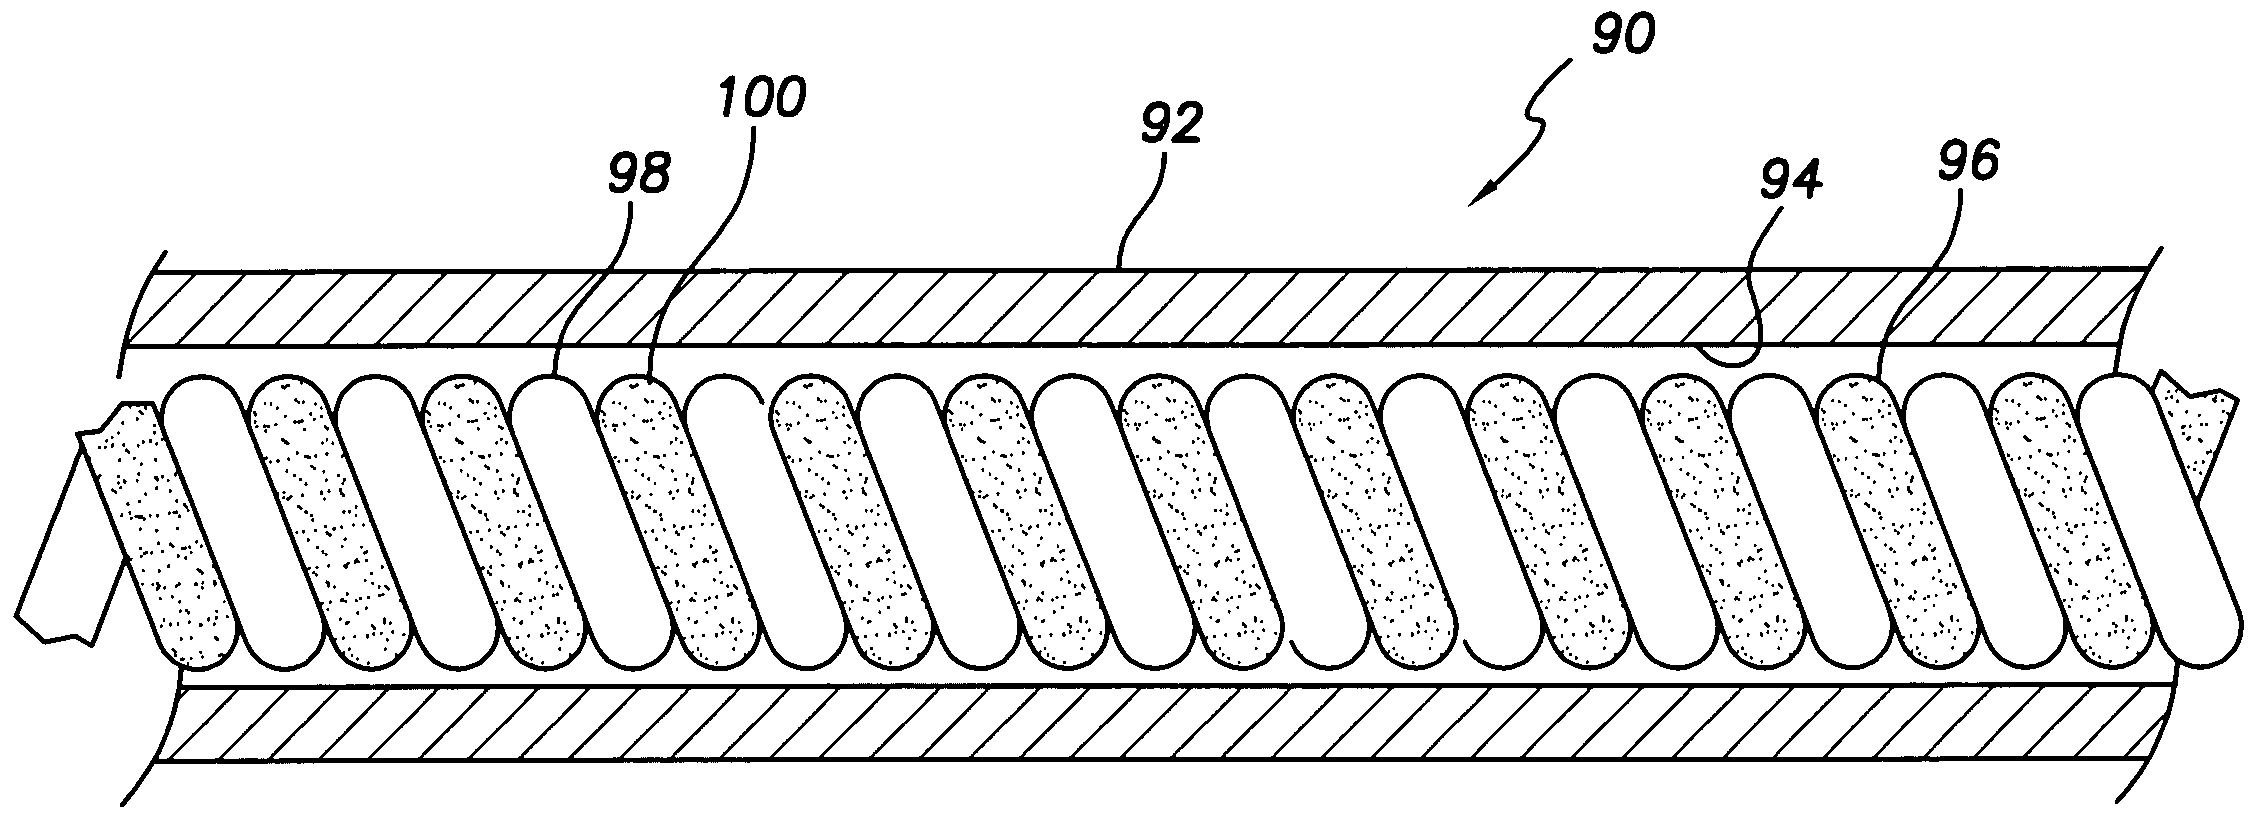 Implantable medical leads and devices having carbon nanotube-based anti-electrostatic coatings and methods for making such leads and devices